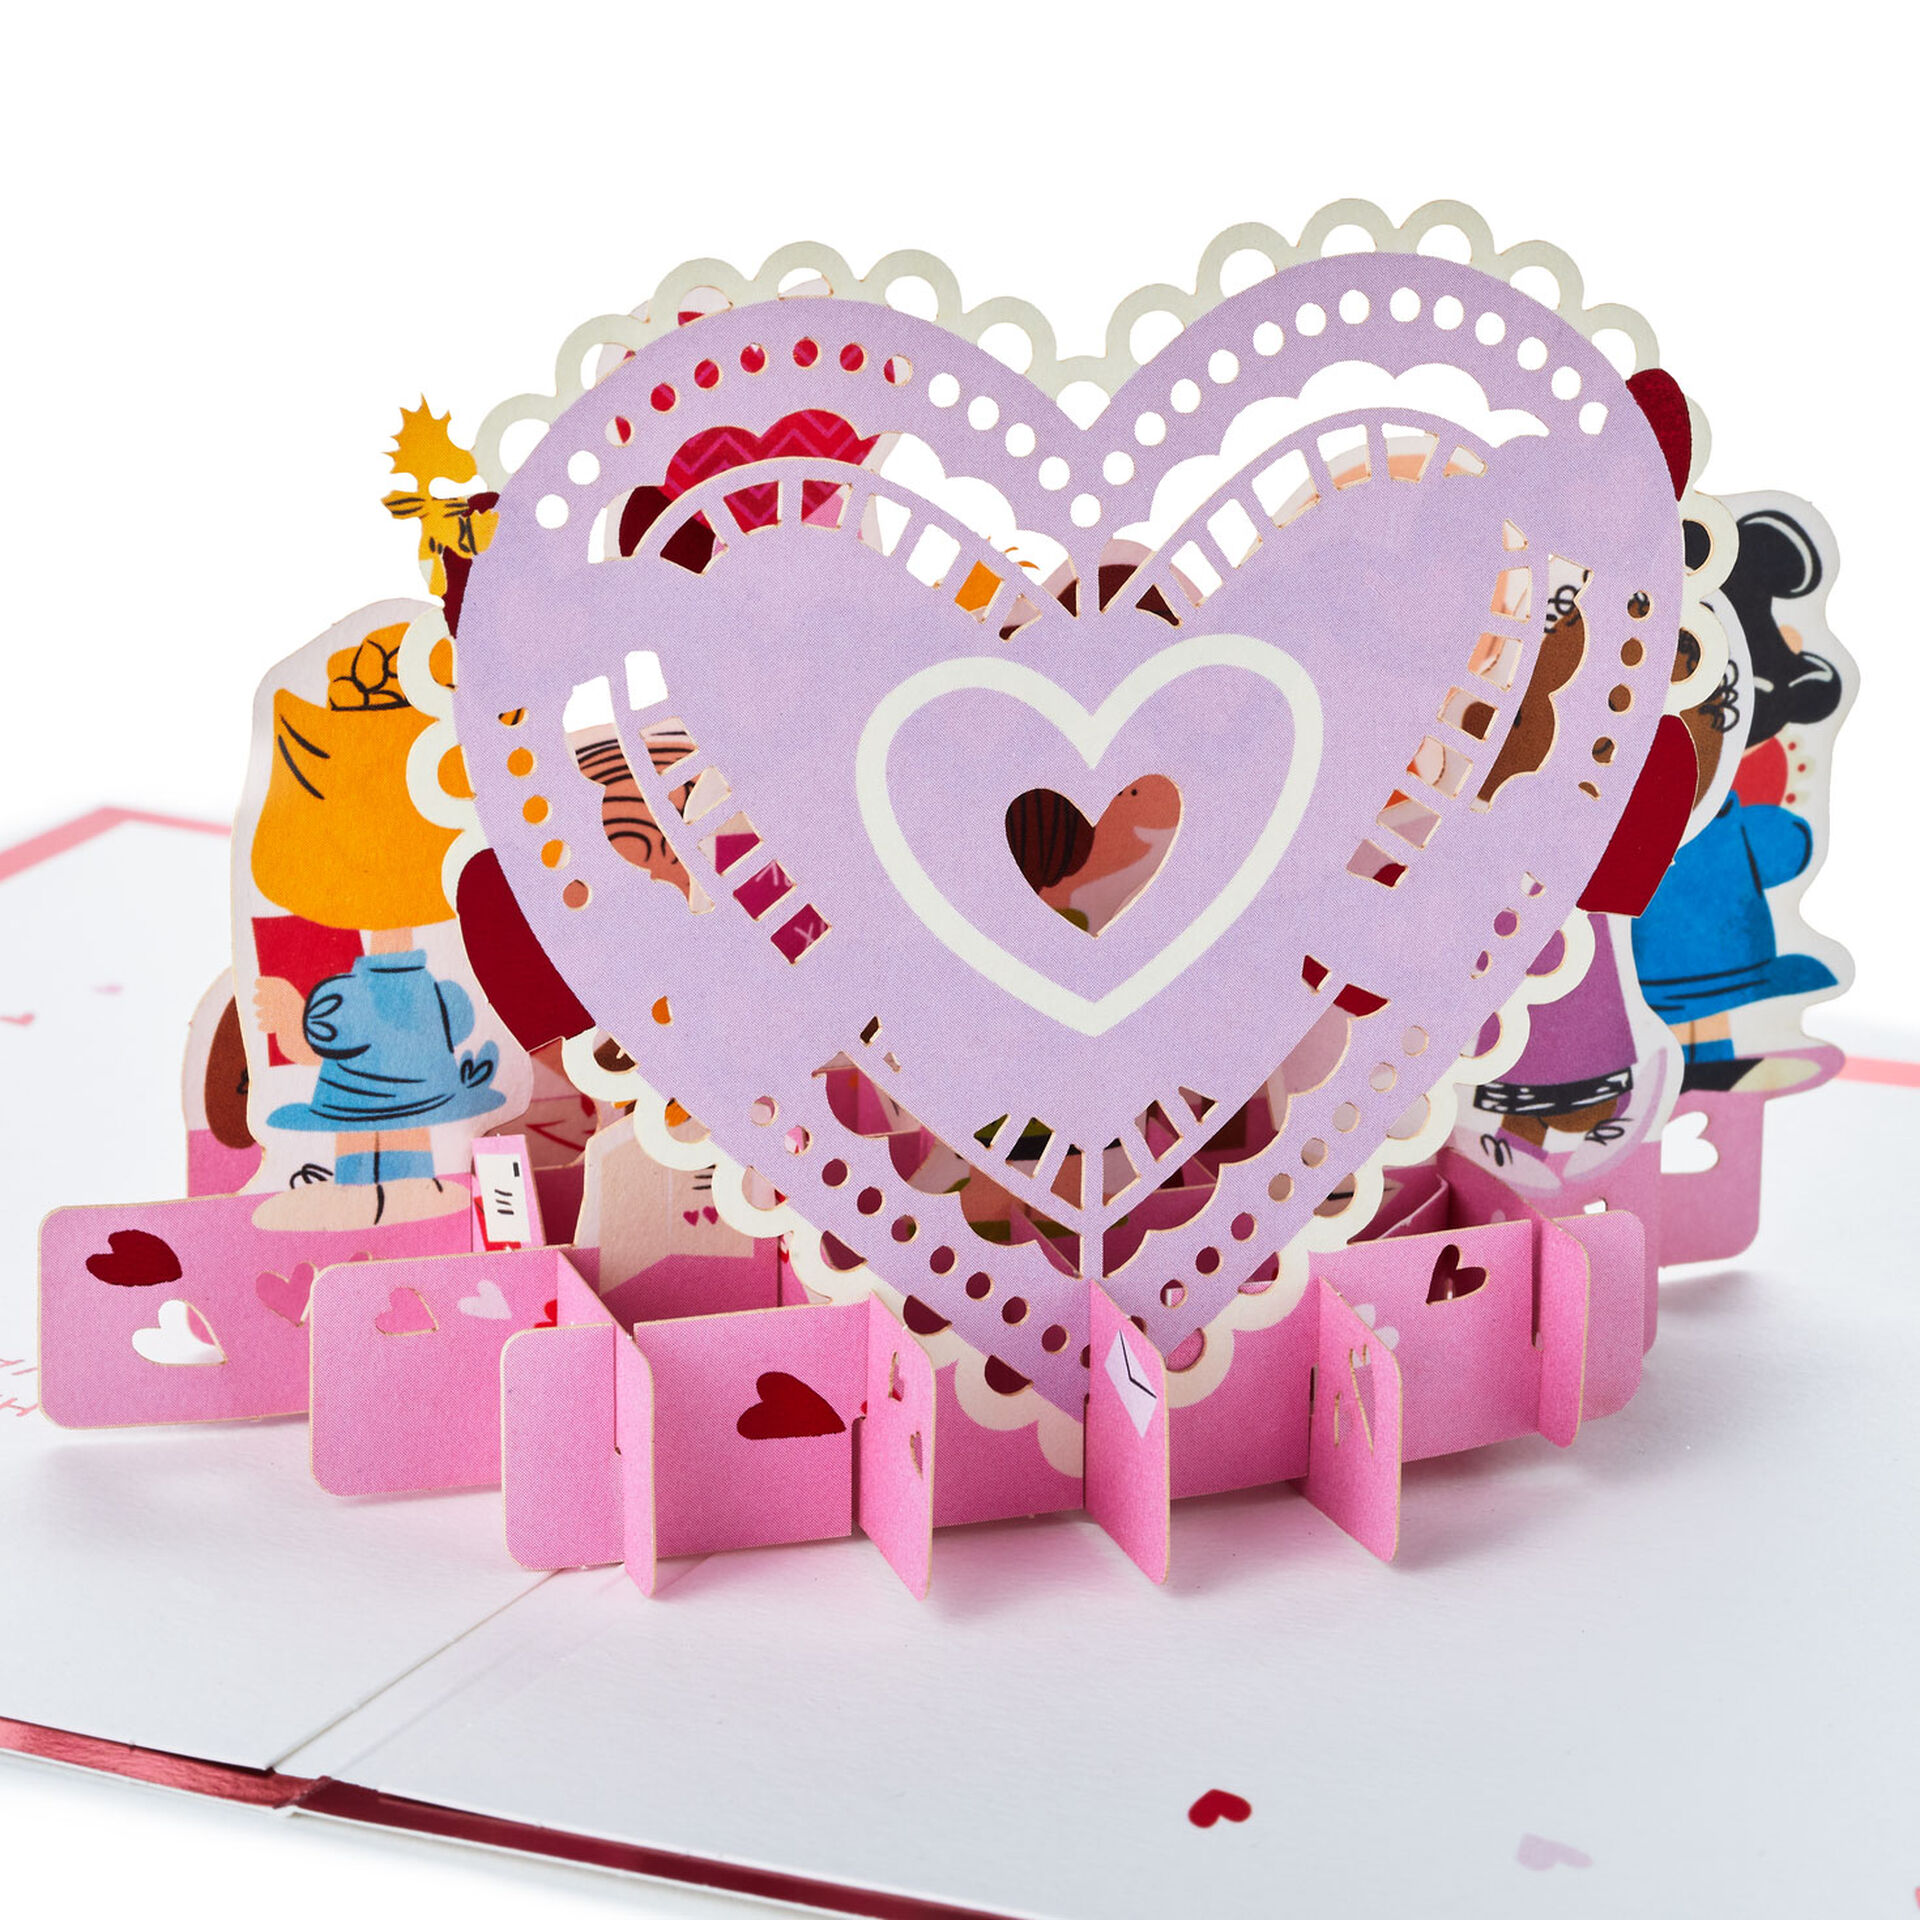 Snoopy-and-Peanuts-Gang-3D-PopUp-Valentines-Day-Card_1499IAV5072_04